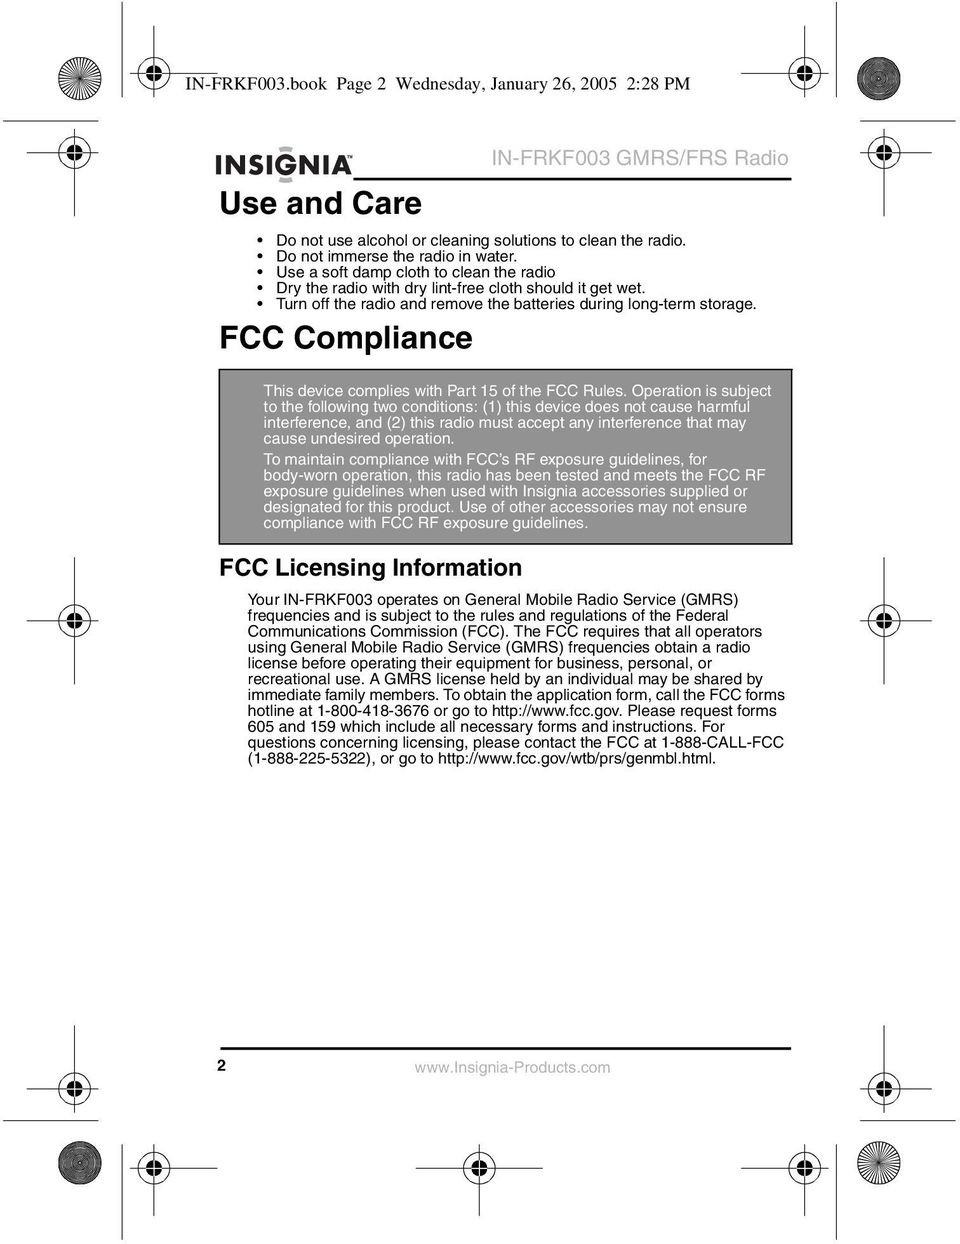 FCC Compliance This device complies with Part 15 of the FCC Rules.